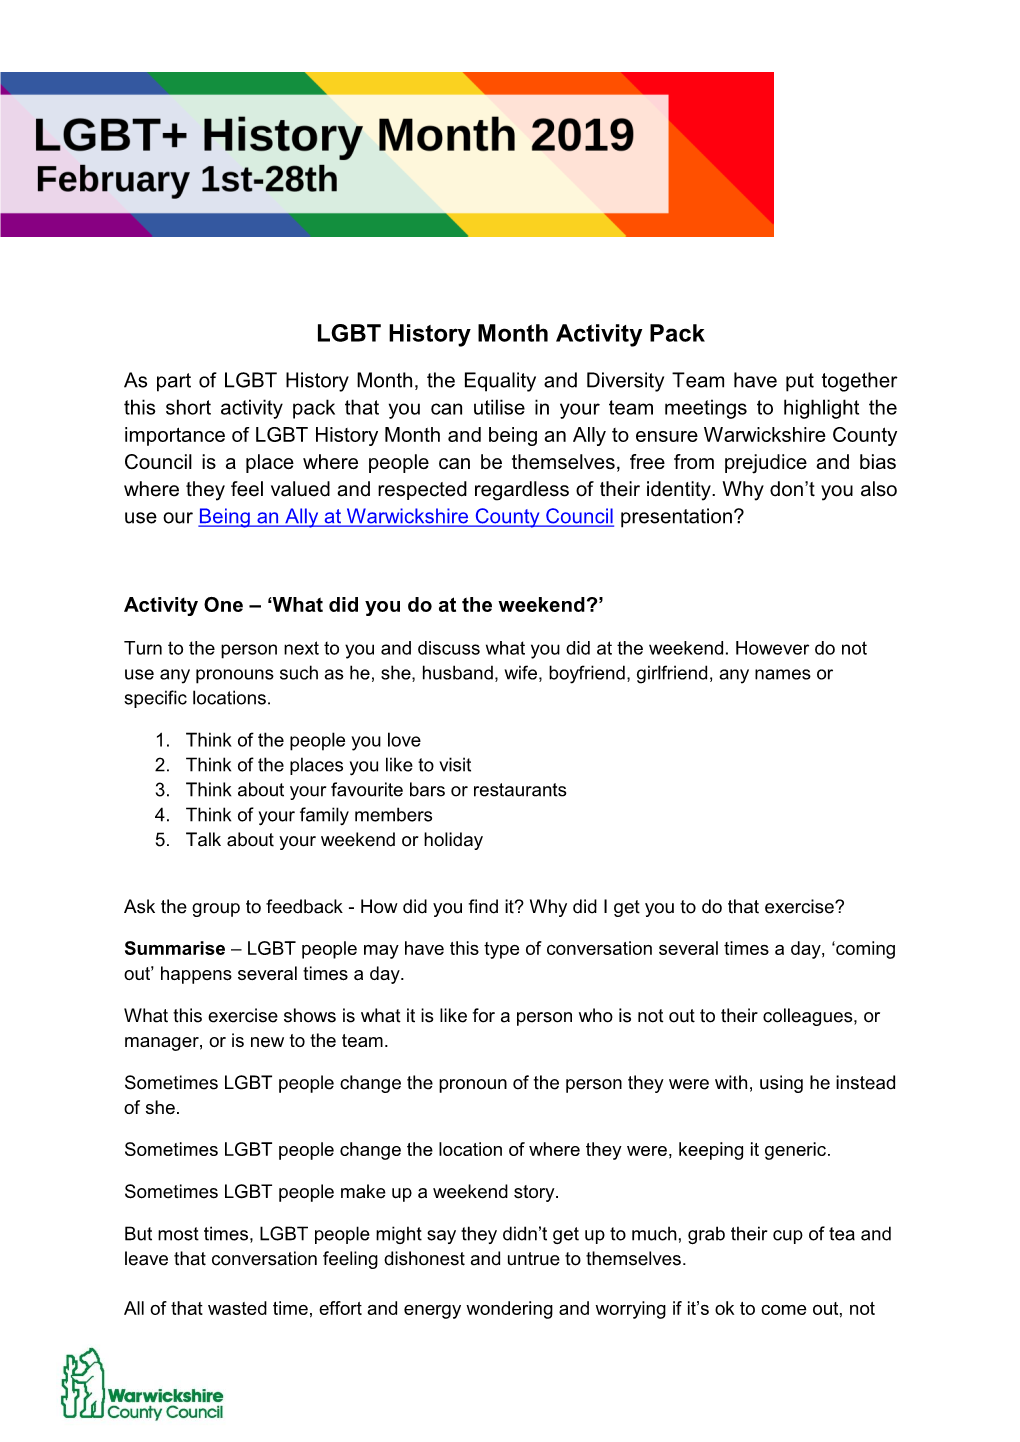 LGBT History Month Activity Pack